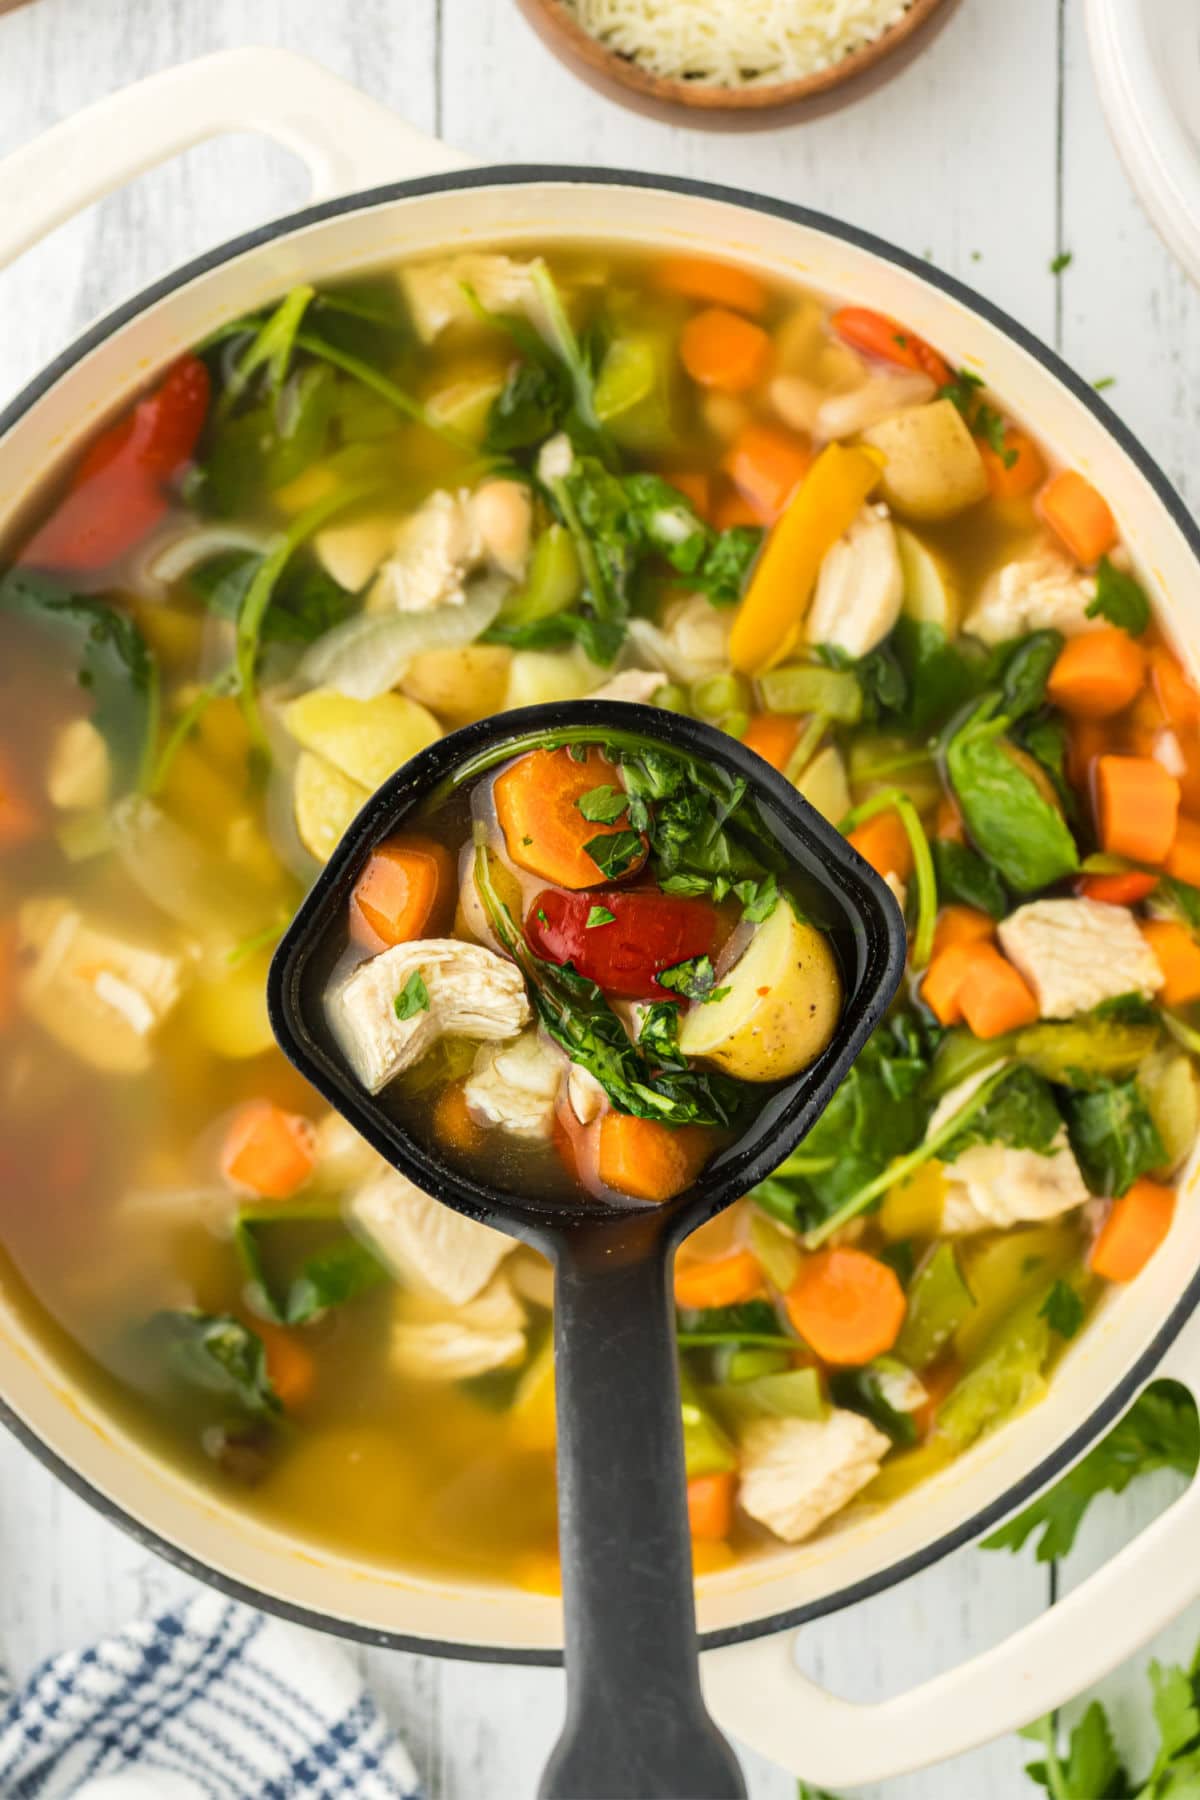 In the foreground, a ladle is shown scooping some Tuscan turkey soup, highlighting veggies, potatoes, and turkey in a broth. In the background is the rest of the soup in a white Dutch oven. 